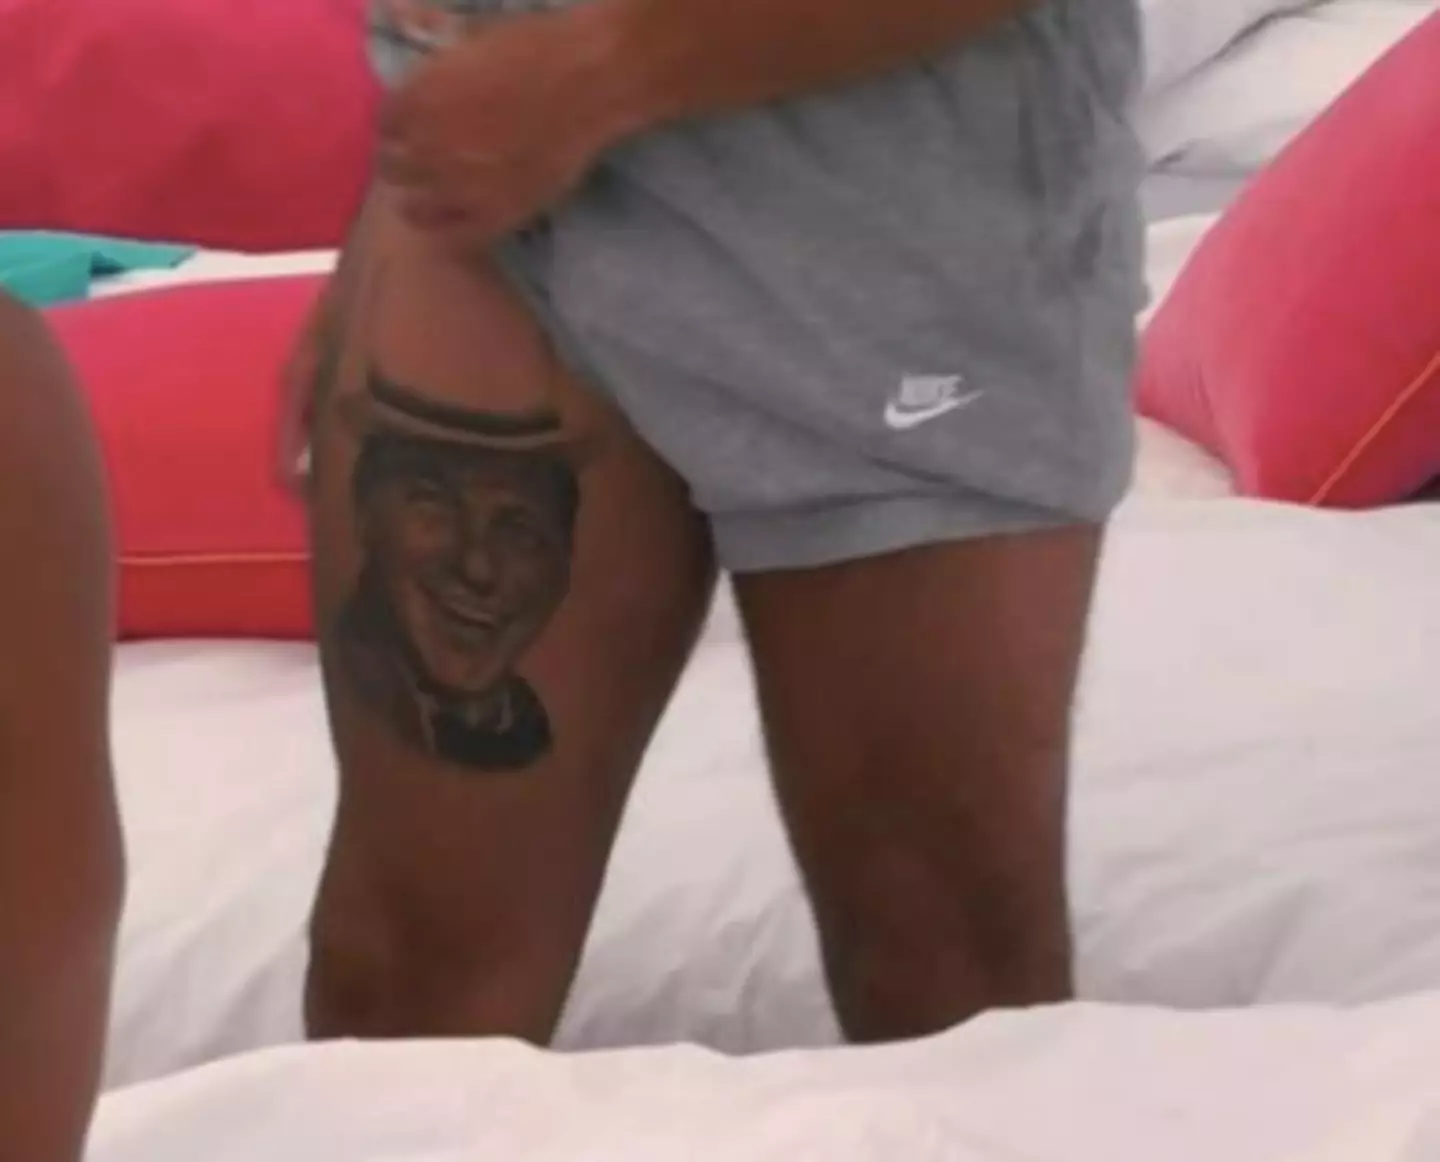 LLiam's tattoos have also caught viewers' eyes (